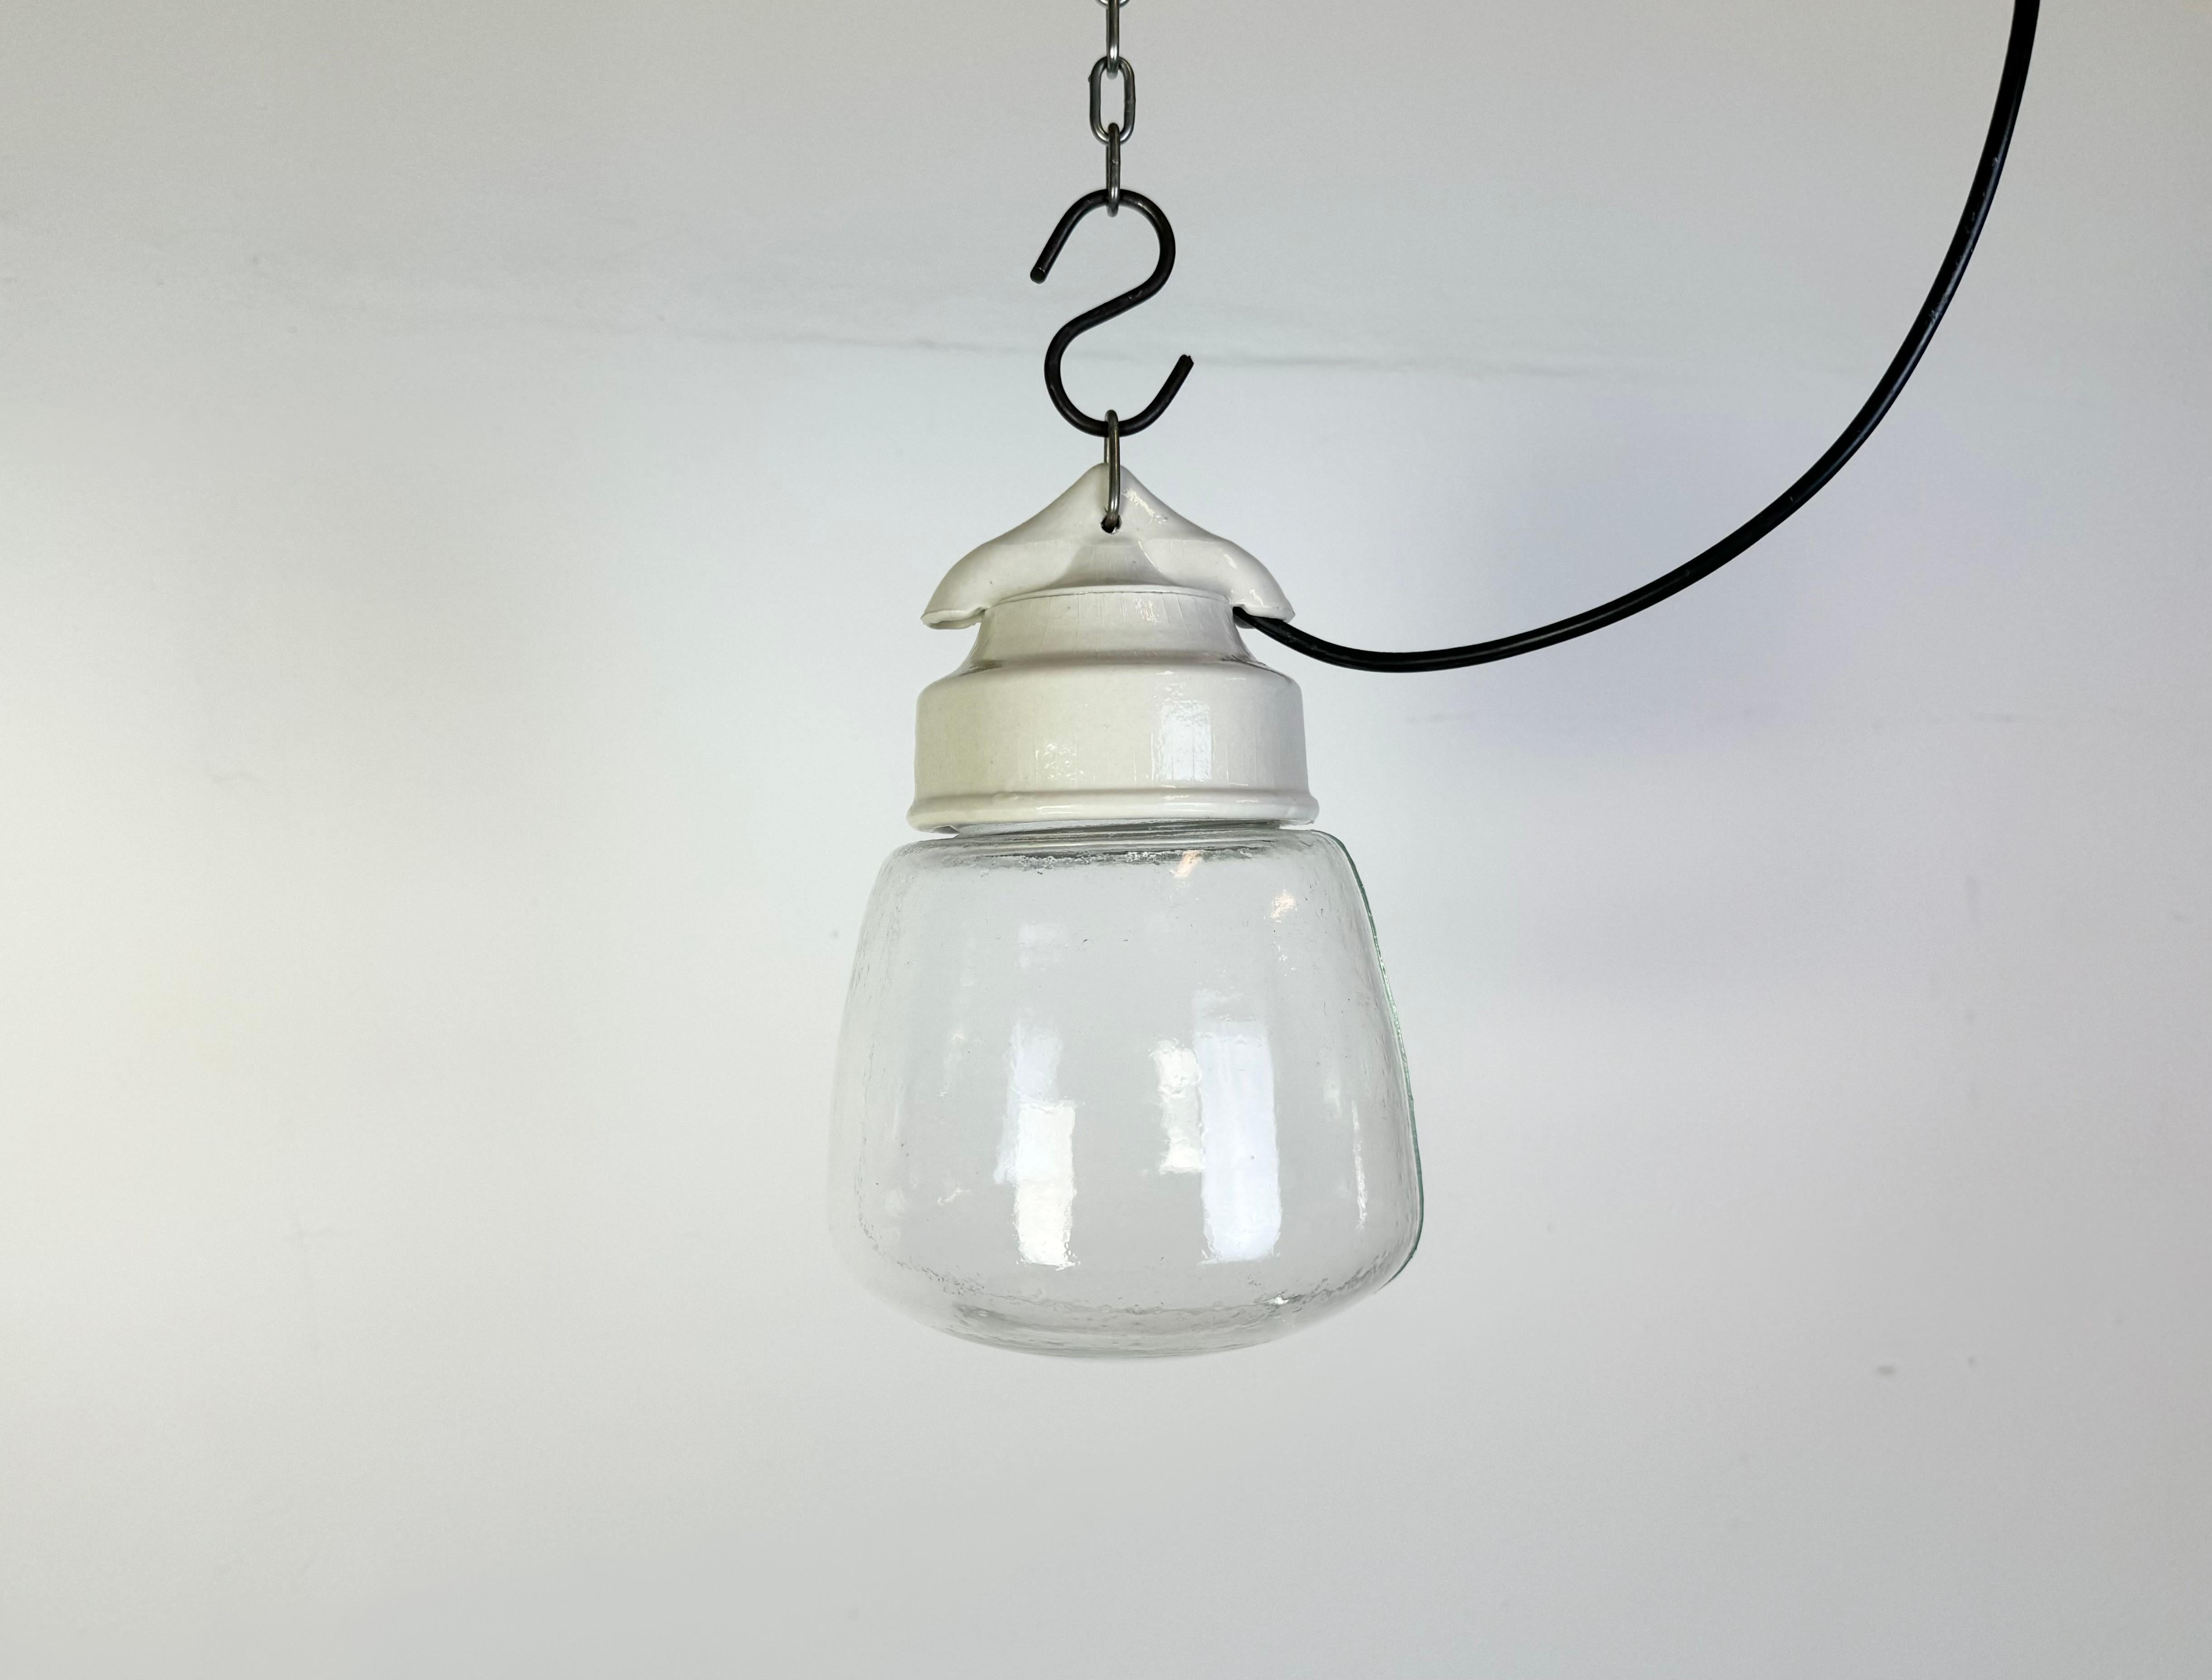 Vintage industrial light made in former Czechoslovakia  during the 1970s. It features a white porcelain top and a glass cover. The socket requires standard E27/ E26 light bulbs. New wire. The weight of the light is 1 kg.
Dimensions:
Diameter of the